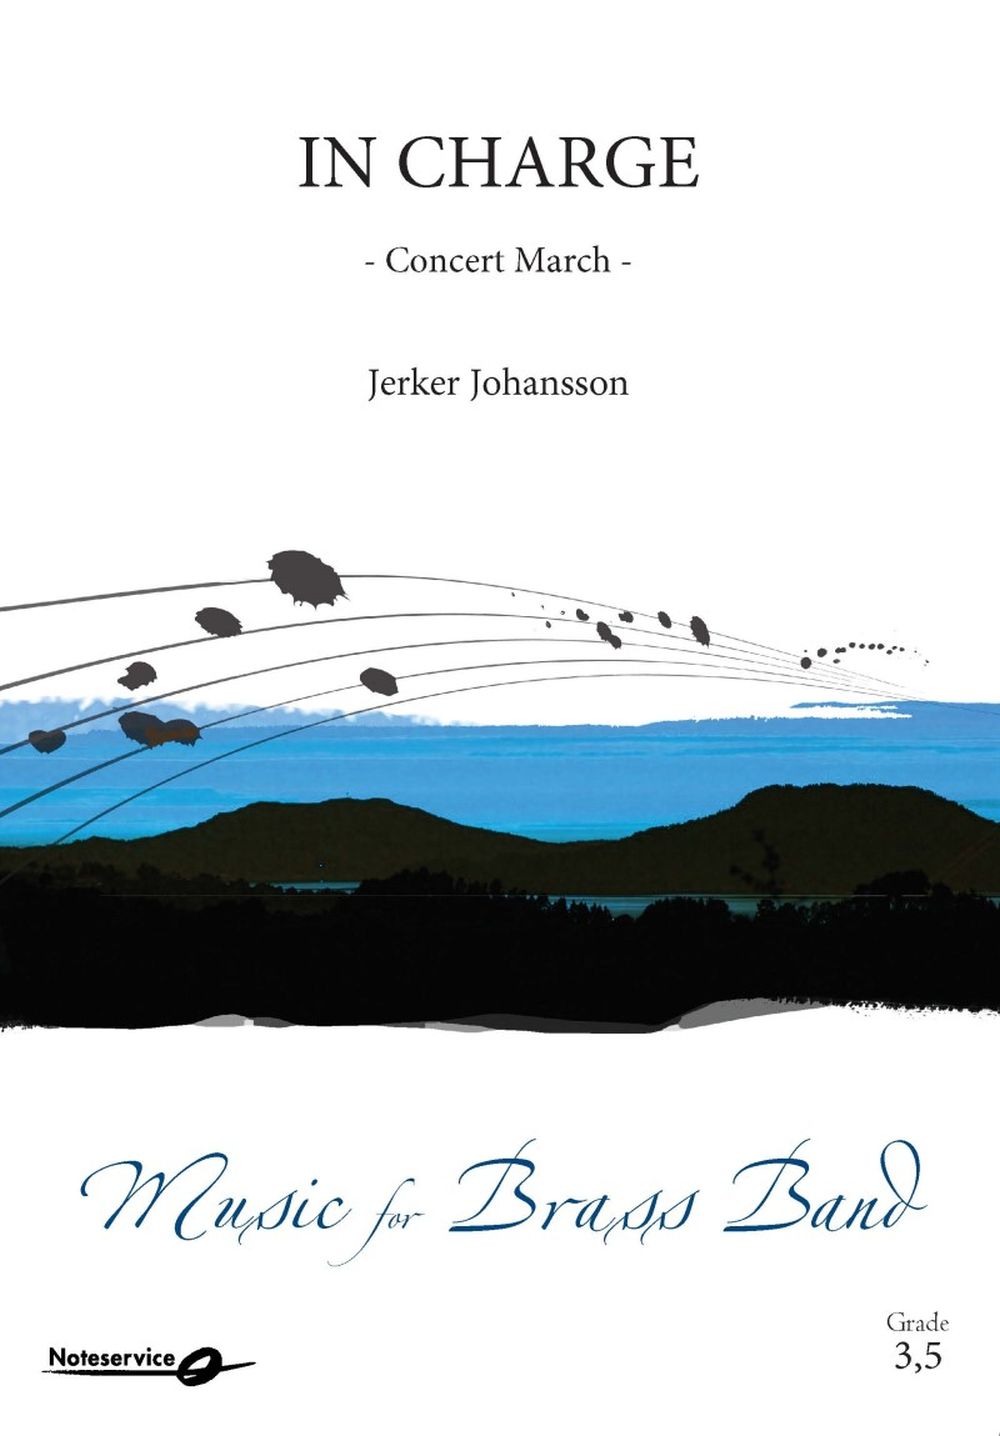 Jerker Johansson: In Charge - Concert March: Brass Band: Full Score